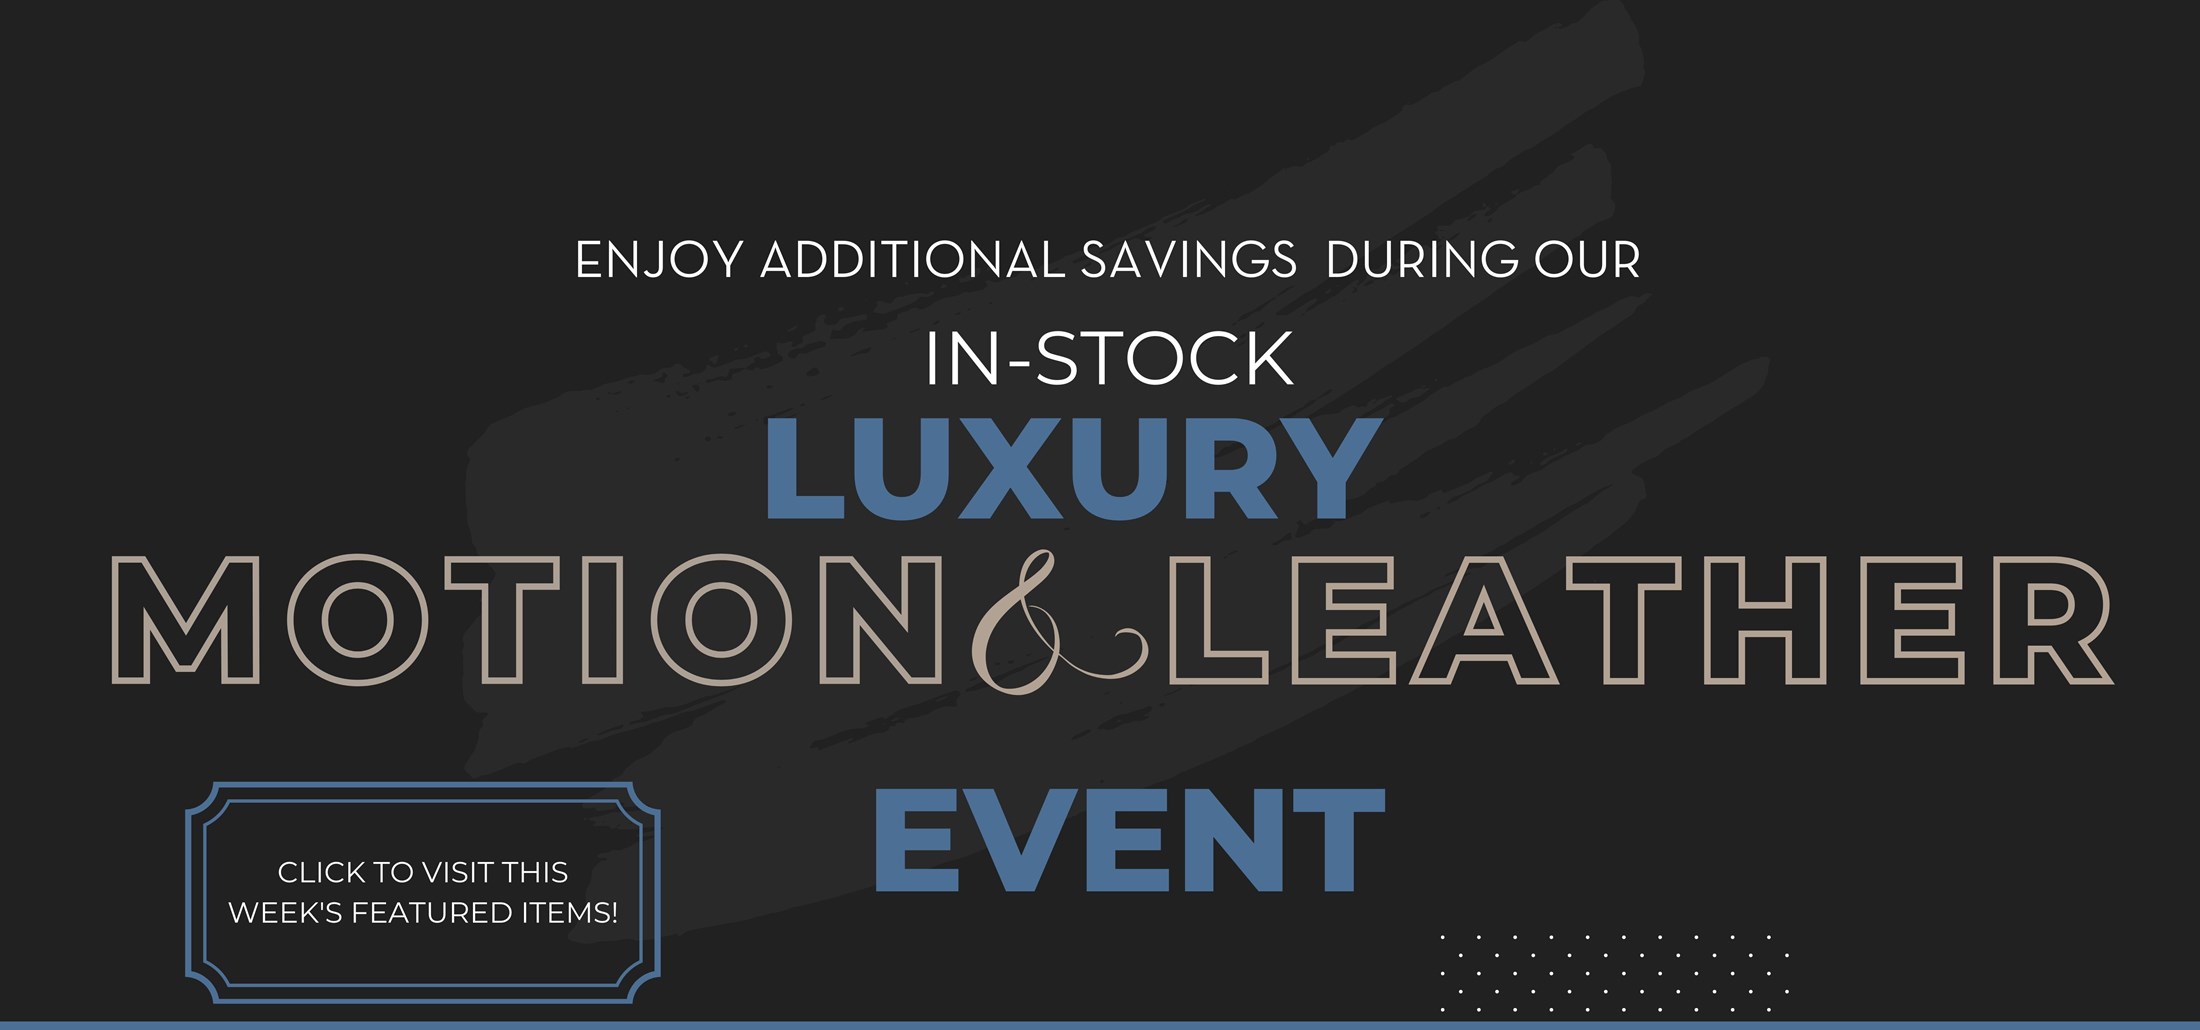 Enjoy additional savings during our in-stock luxury leather event. Click to visit this week's featured items!